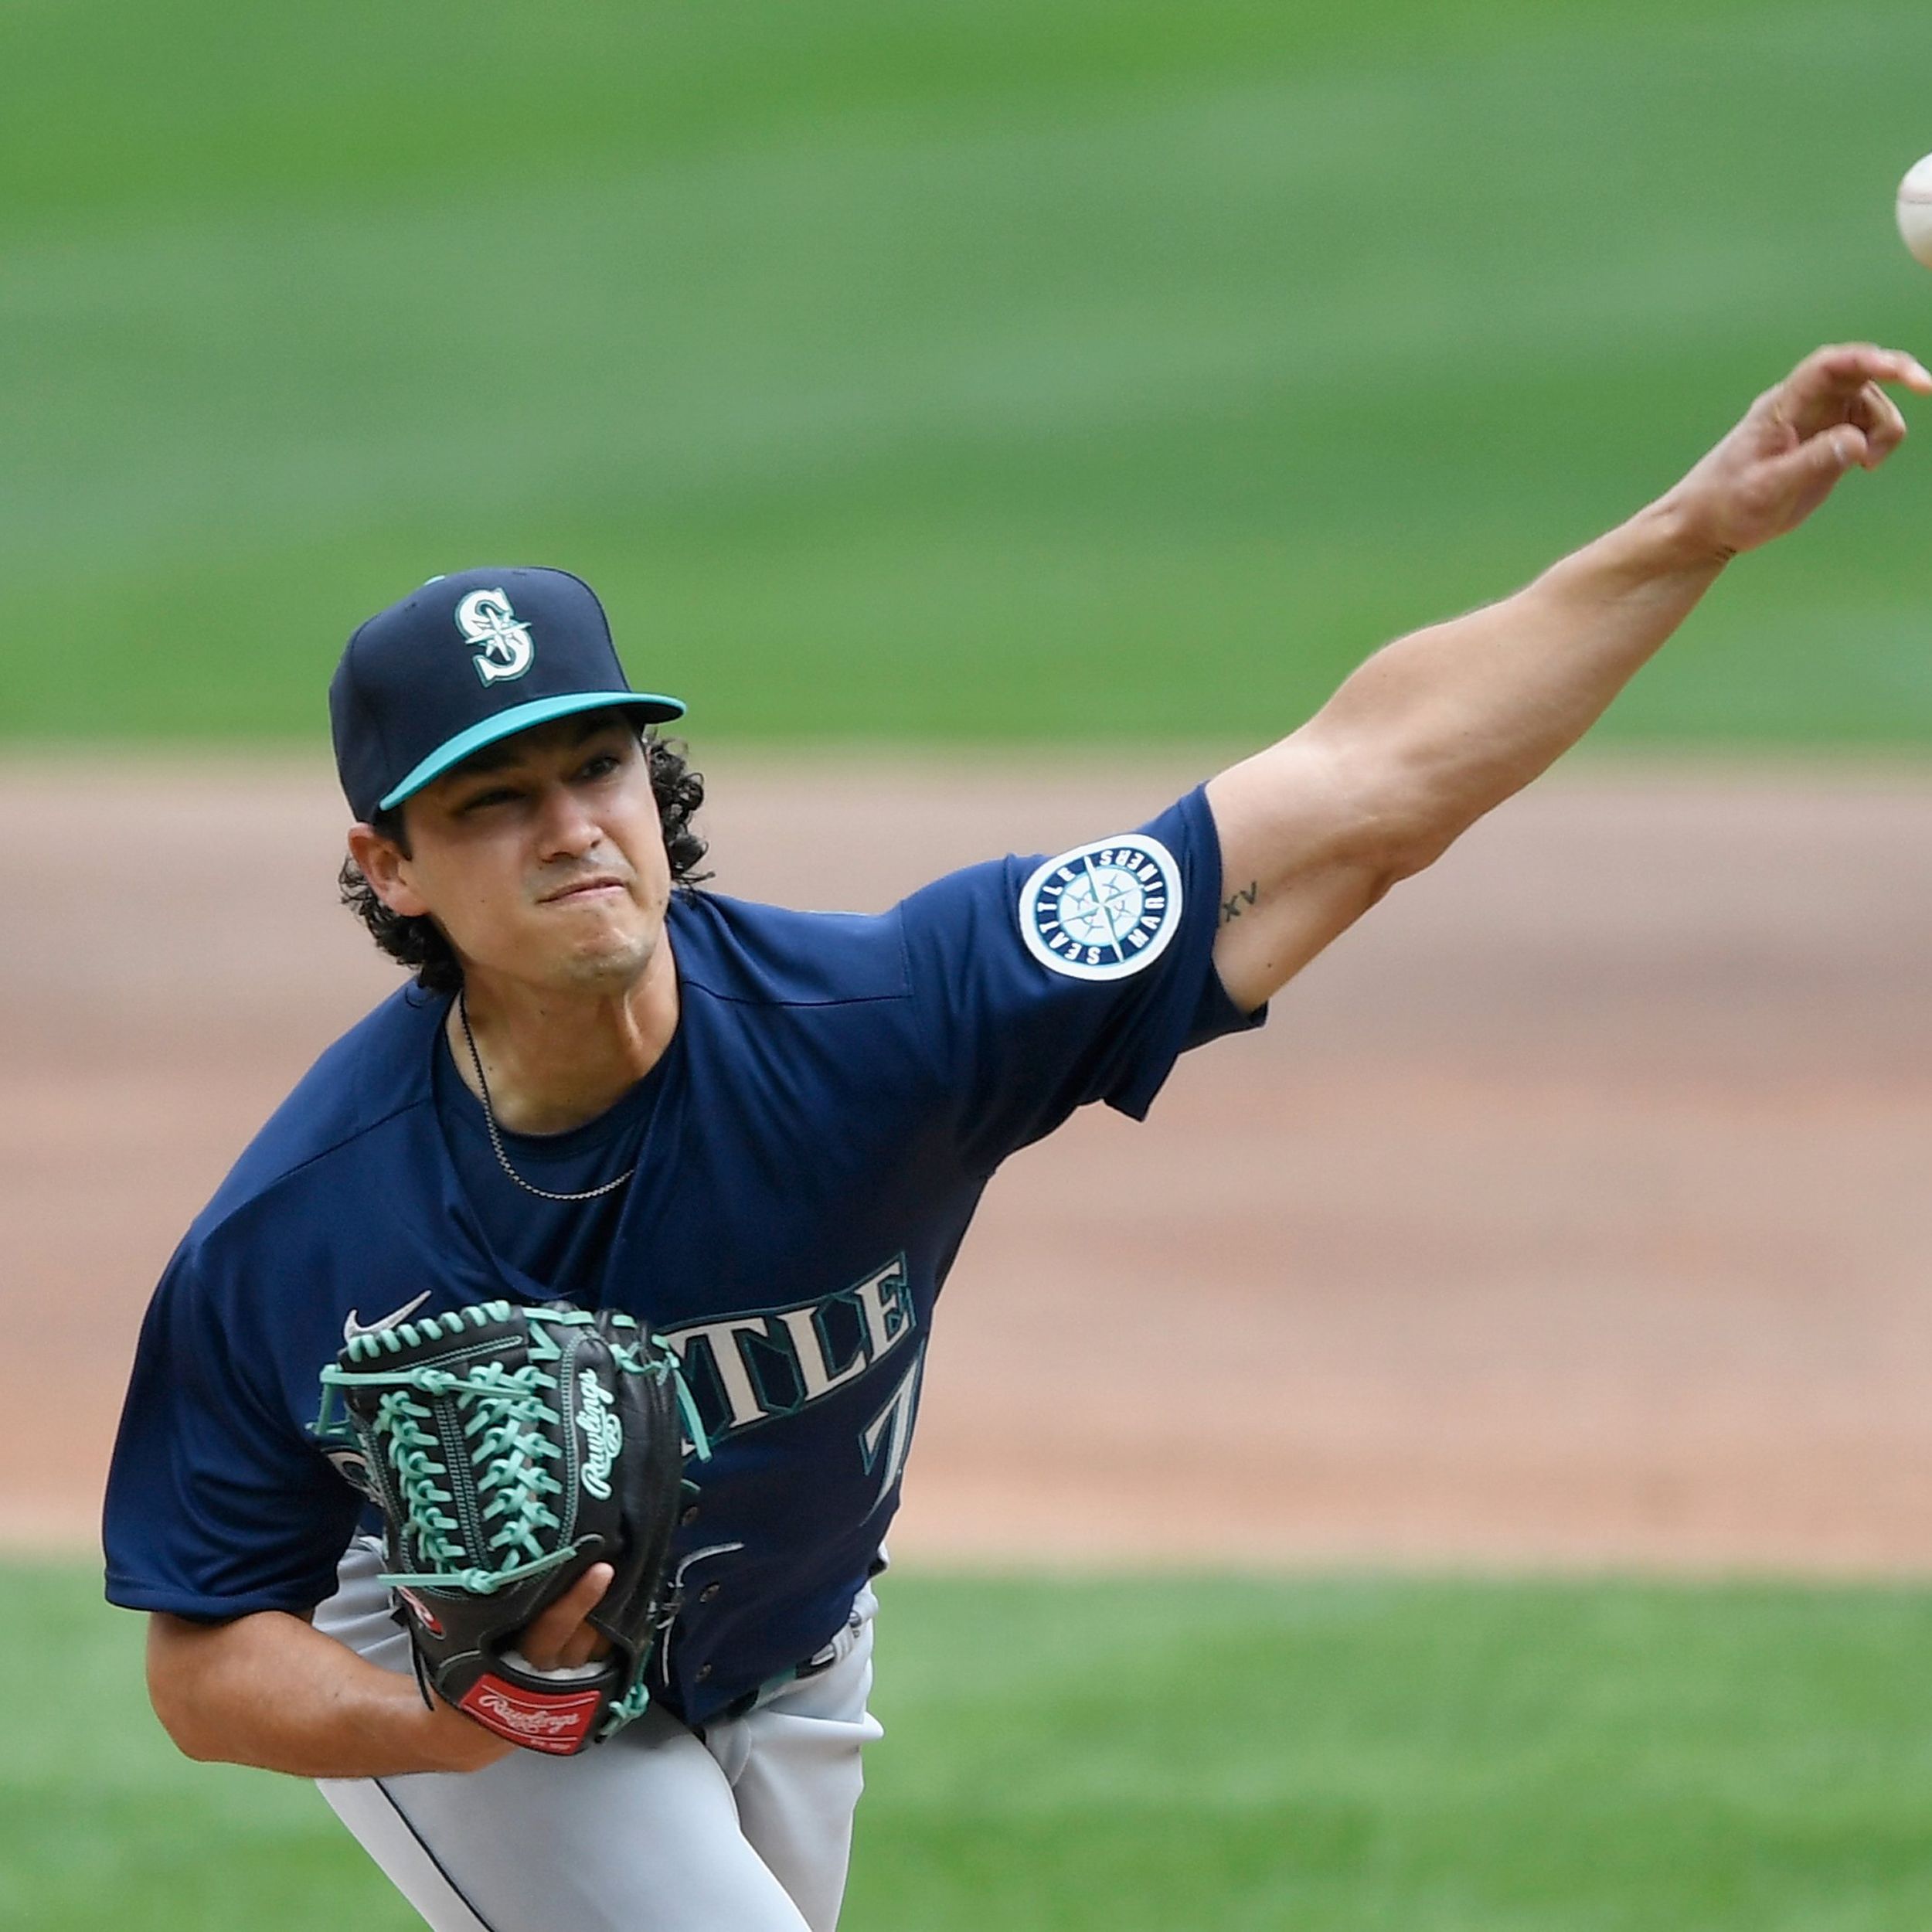 Dipoto: Young Mariners followed 'top-20 pitcher' Marco Gonzales on streak -  Seattle Sports